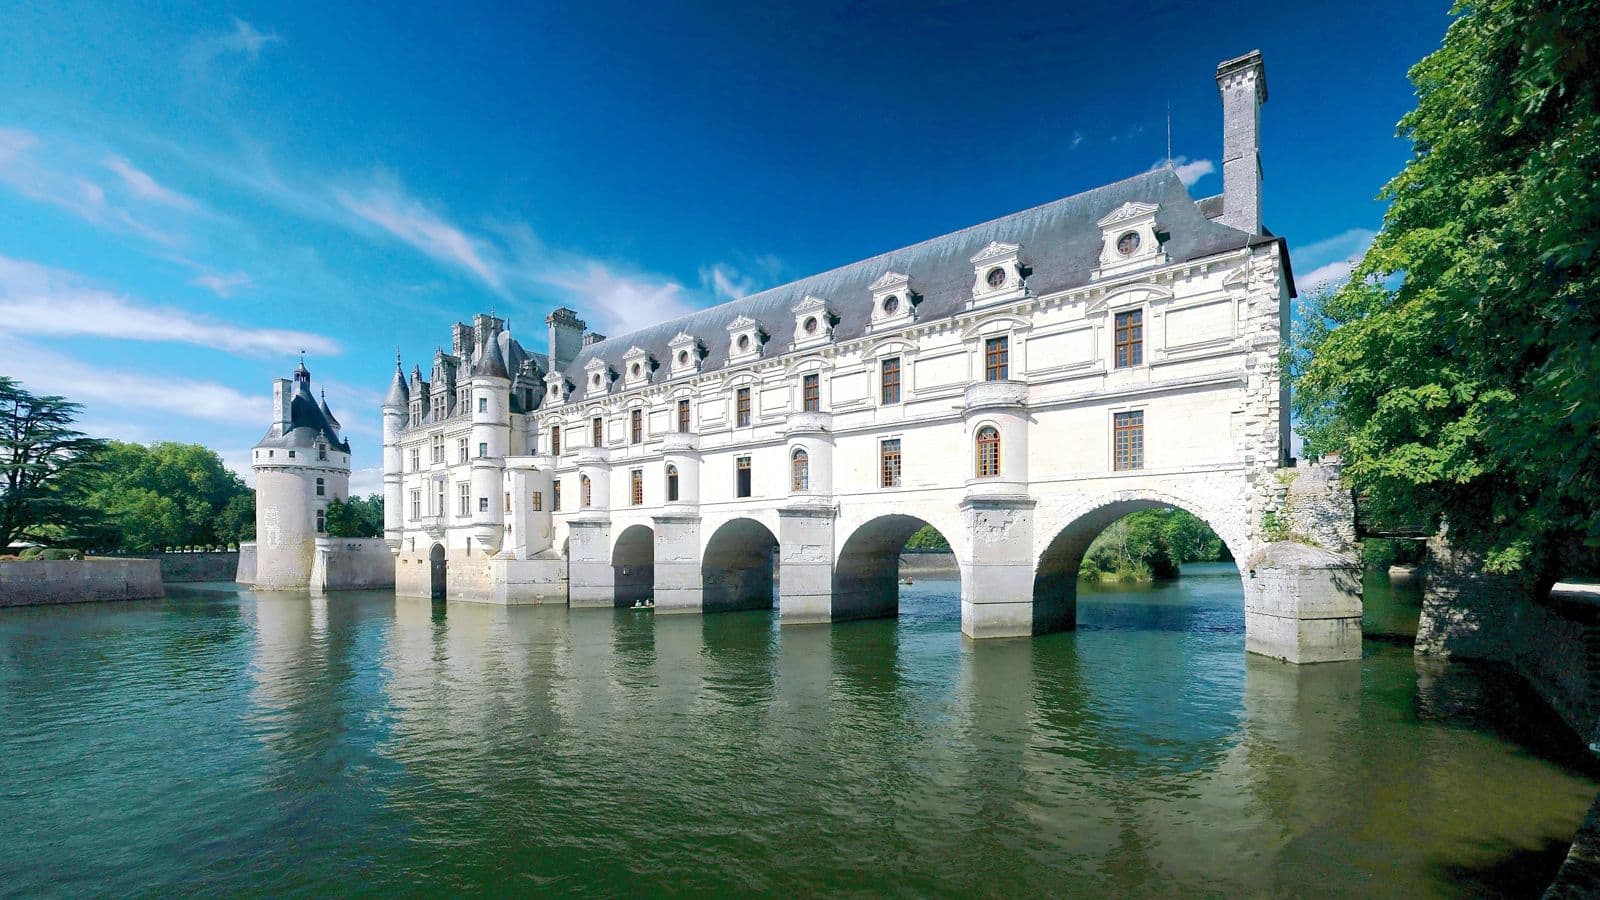 Stroll through history at Chateau de Chenonceau, France